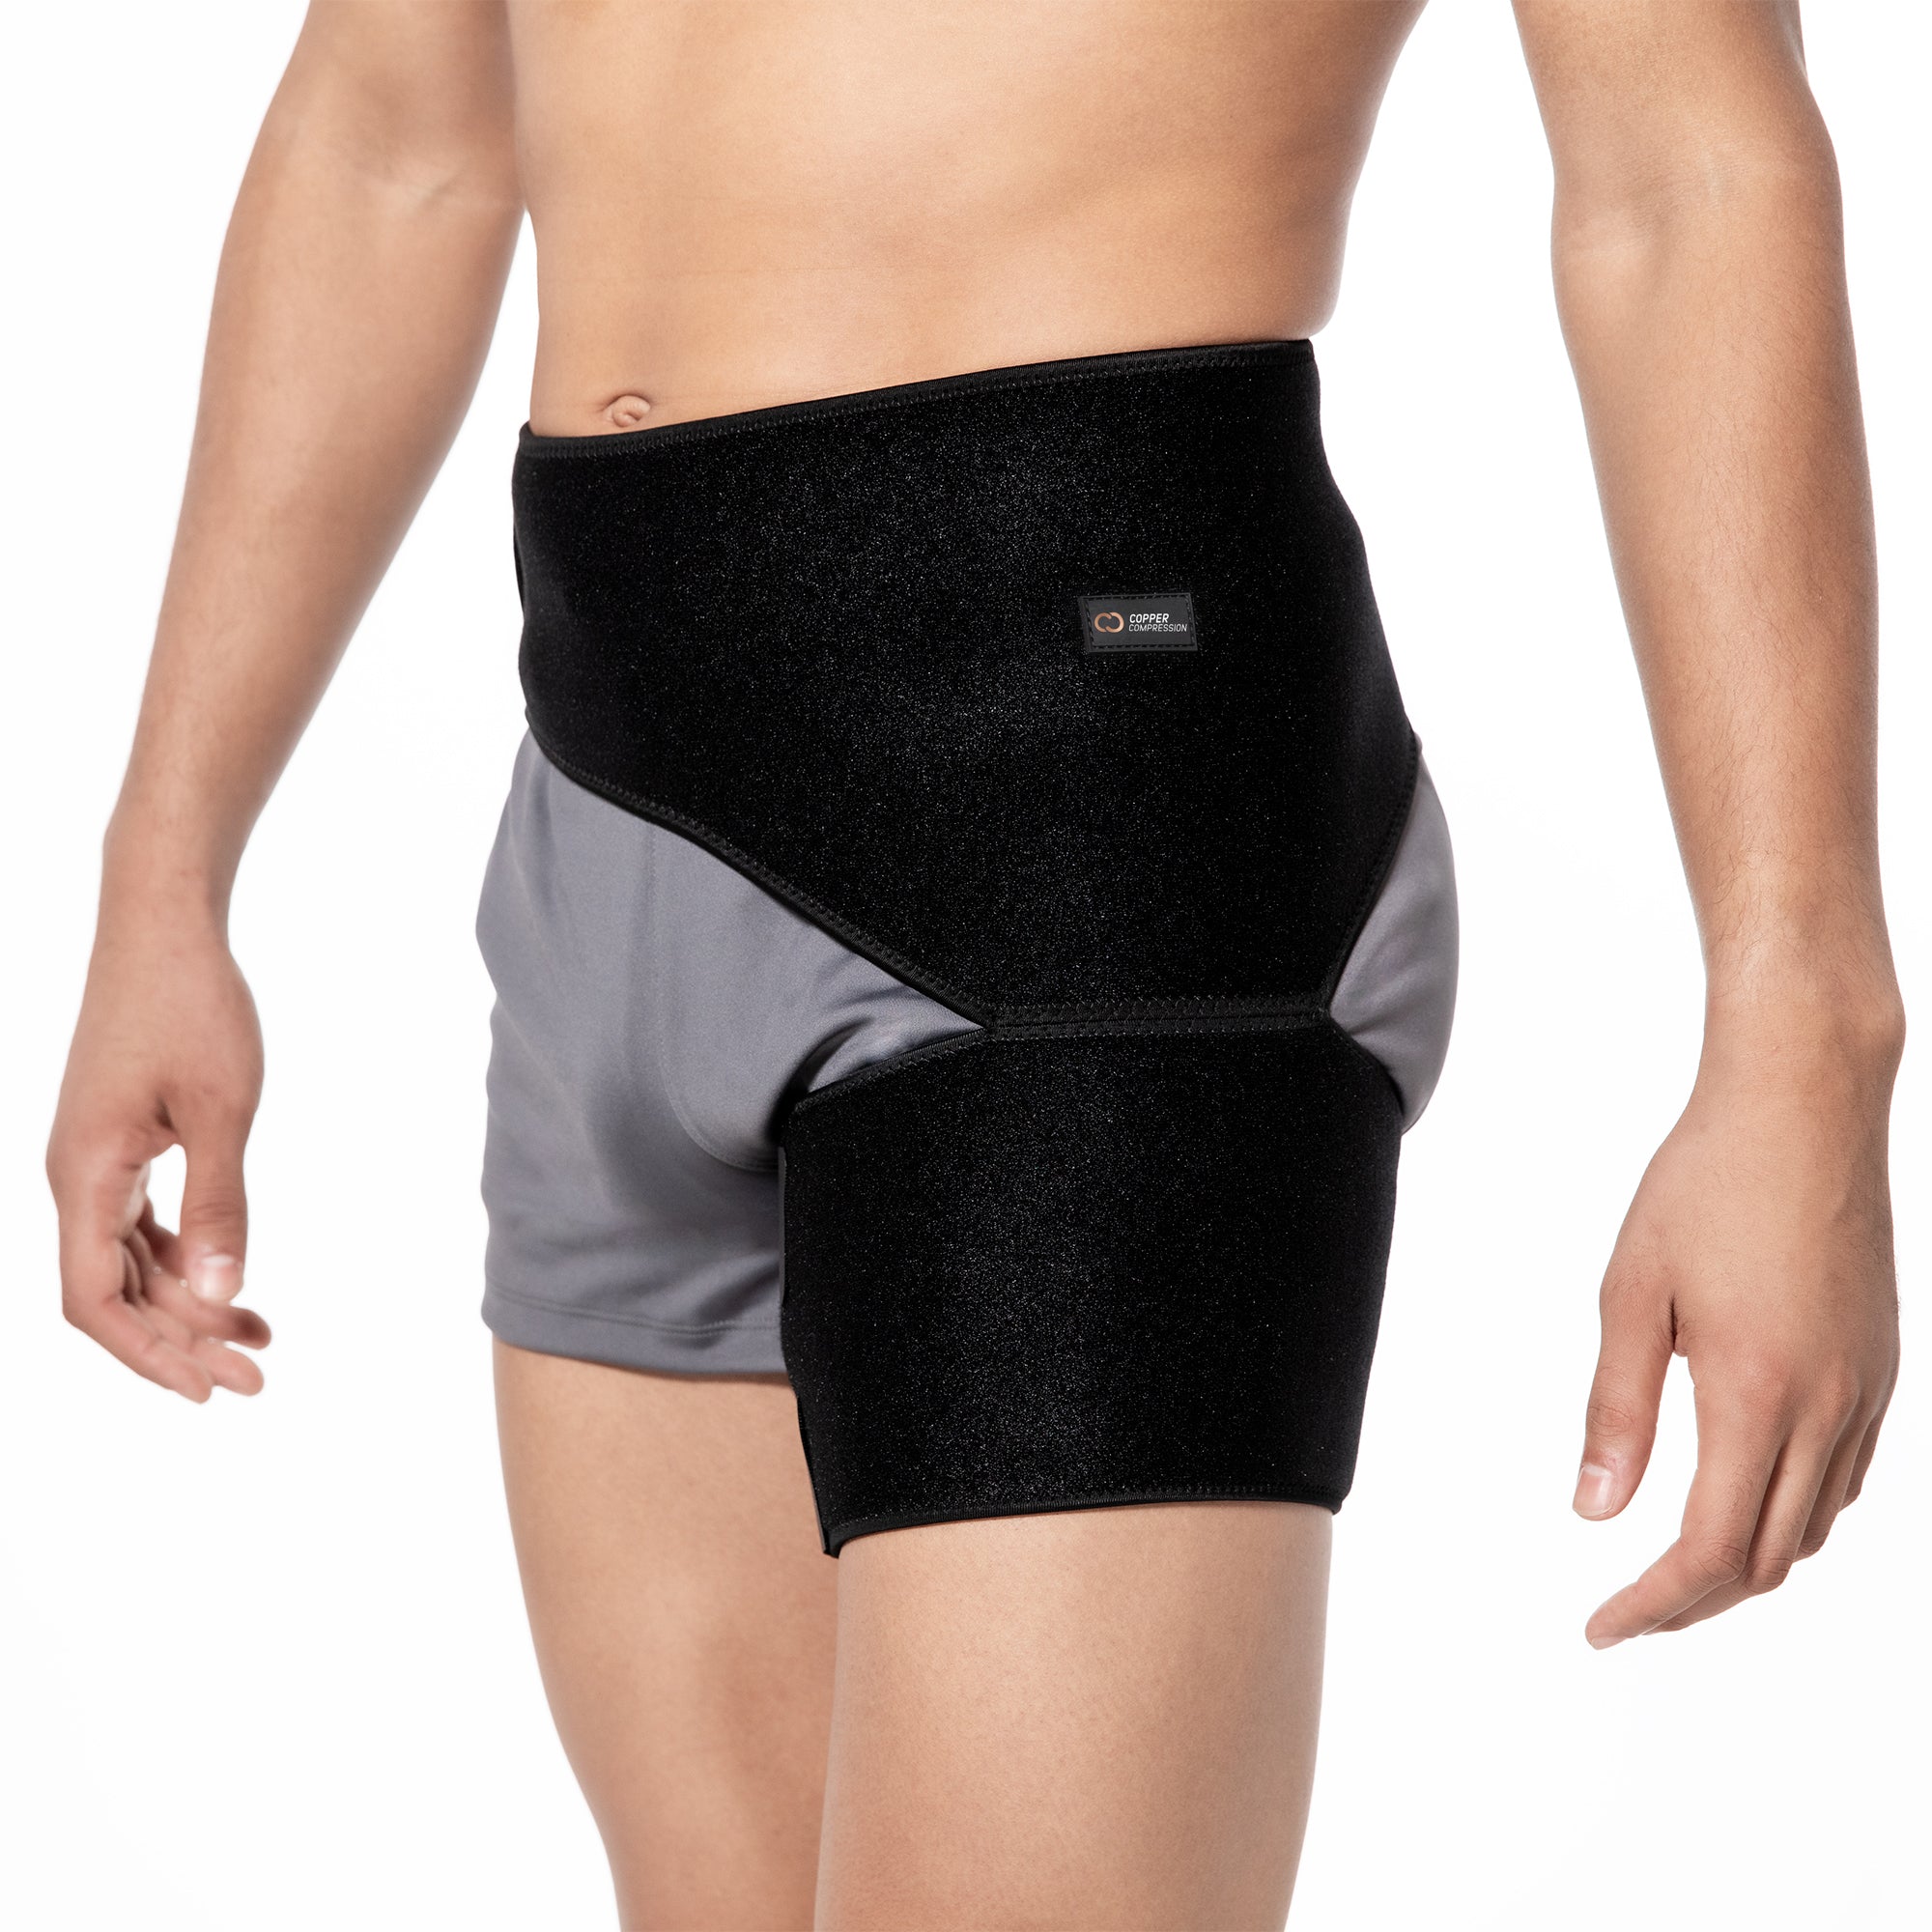 Copper-Infused Groin Thigh Sleeve & Hip Support Wrap - Unisex